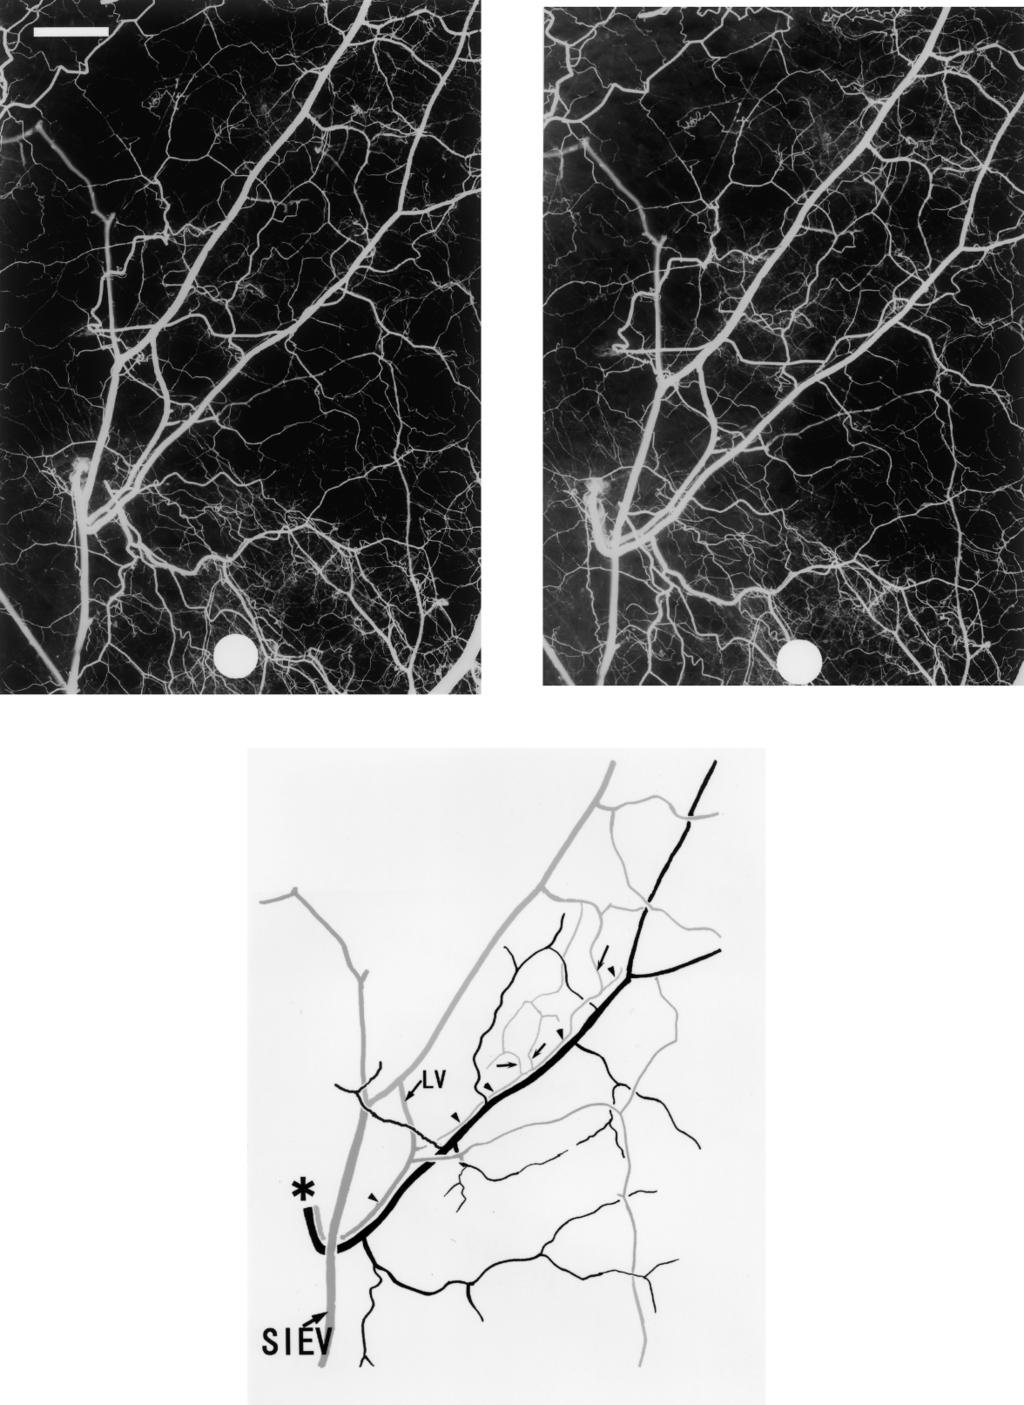 Anatomical relationship between arteries and veins in the paraumbilical region 555 Fig. 3 (Above) Stereographic angiograms of a large paraumbilical arterial and venous perforators.